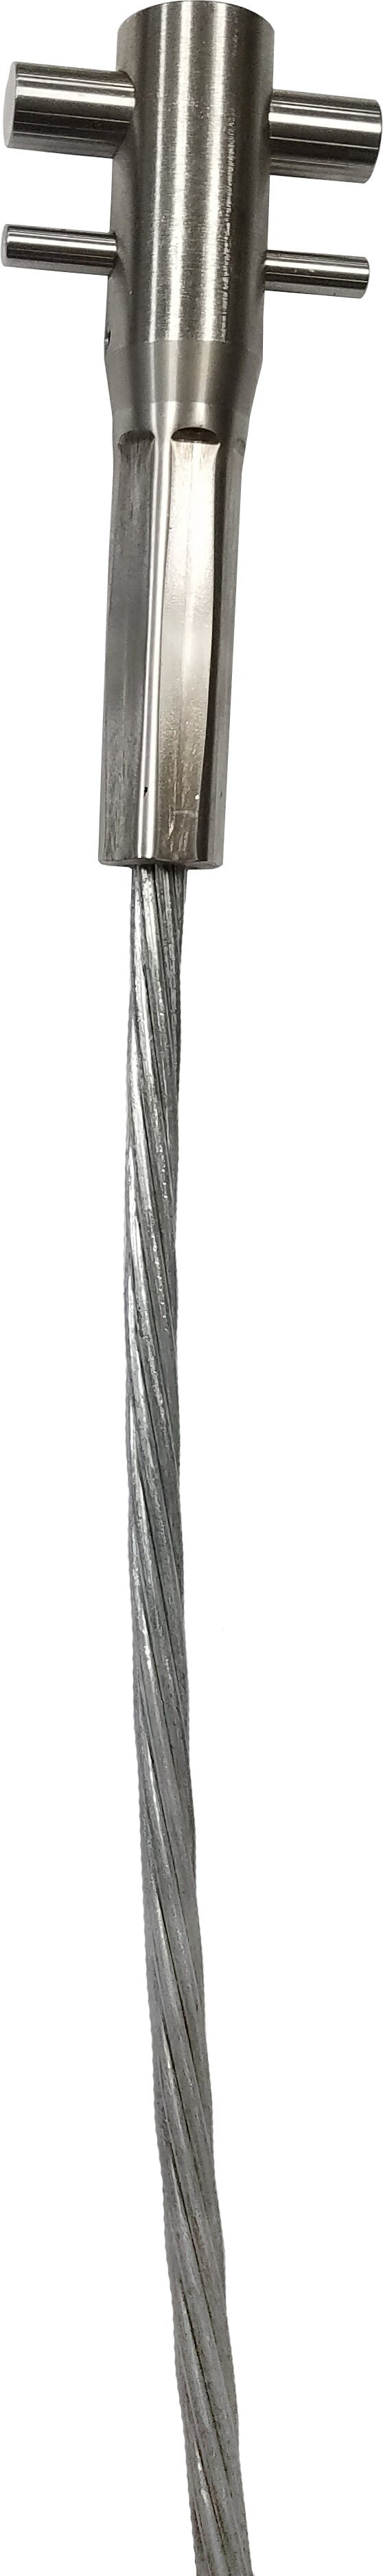 3M™ DBI-SALA® Lad-Saf™ Swaged Cable 6115013, 3/8 Inch, Stainless Steel, 6m_0